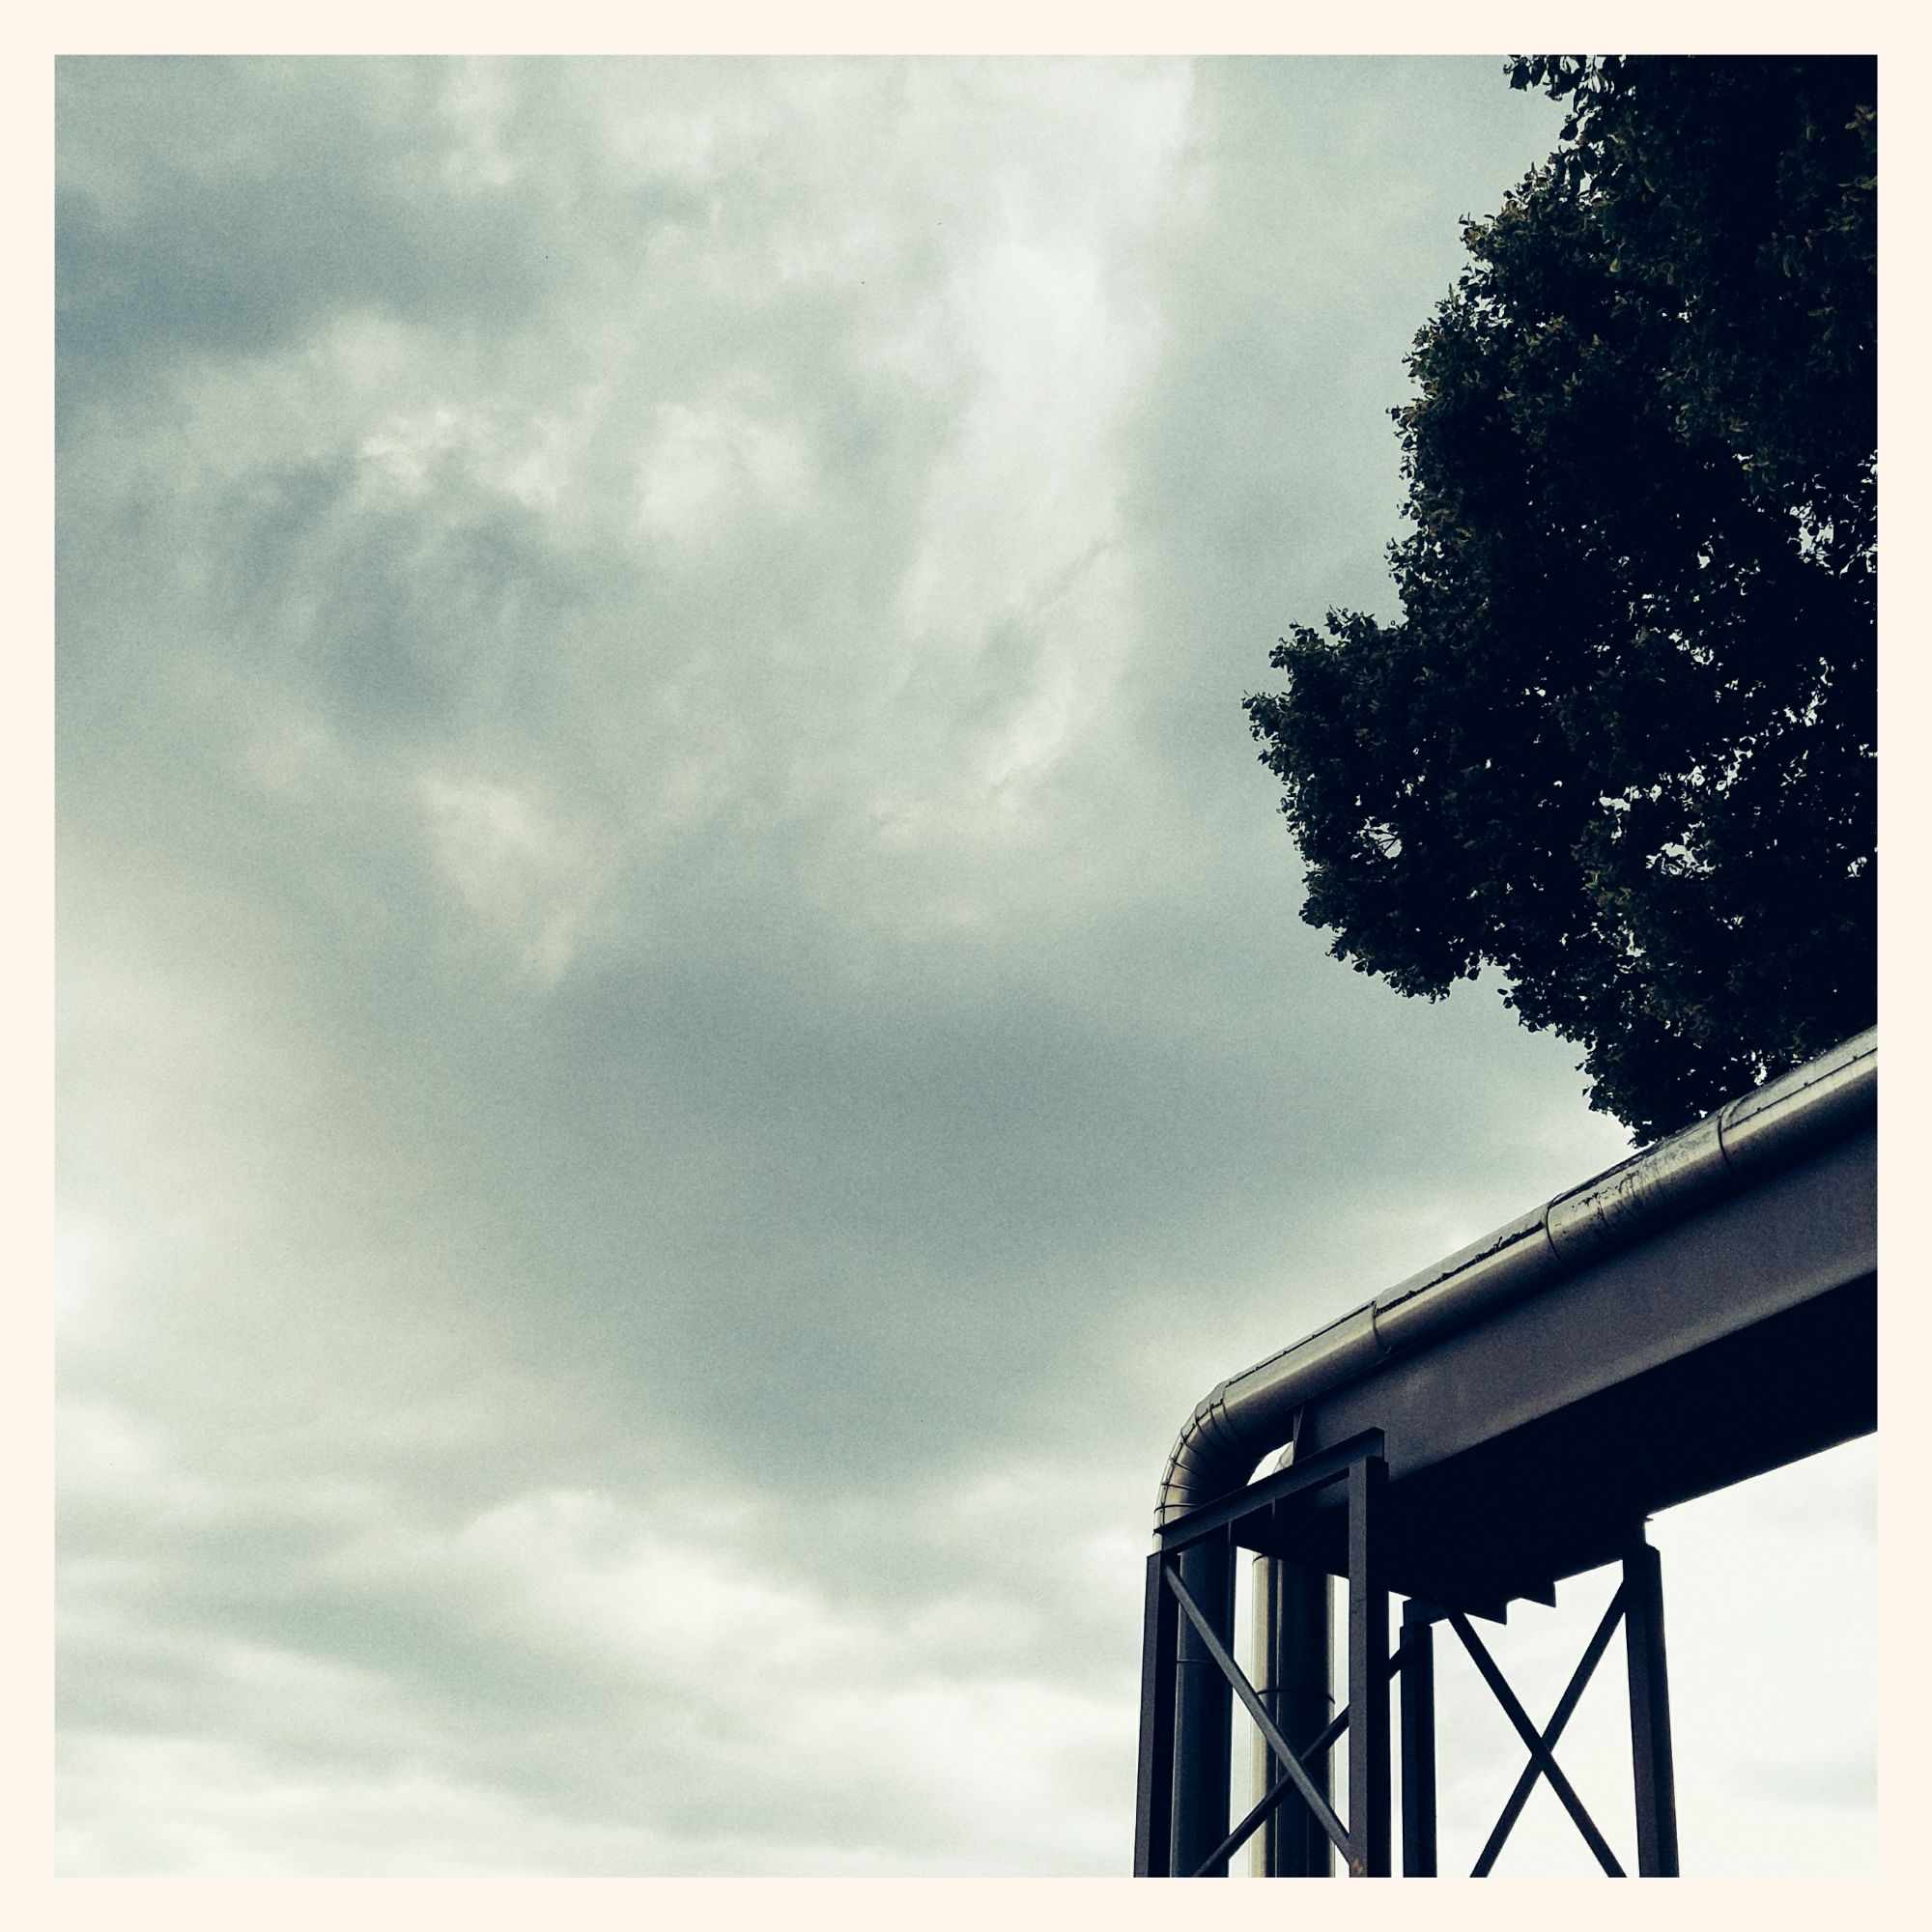 A tree on the right side of the picture, and the end segment of a bridge leading heat pipes across the street. Dense grey clouds on a light sky filling the remainder of the frame. Square cut, thin white border.